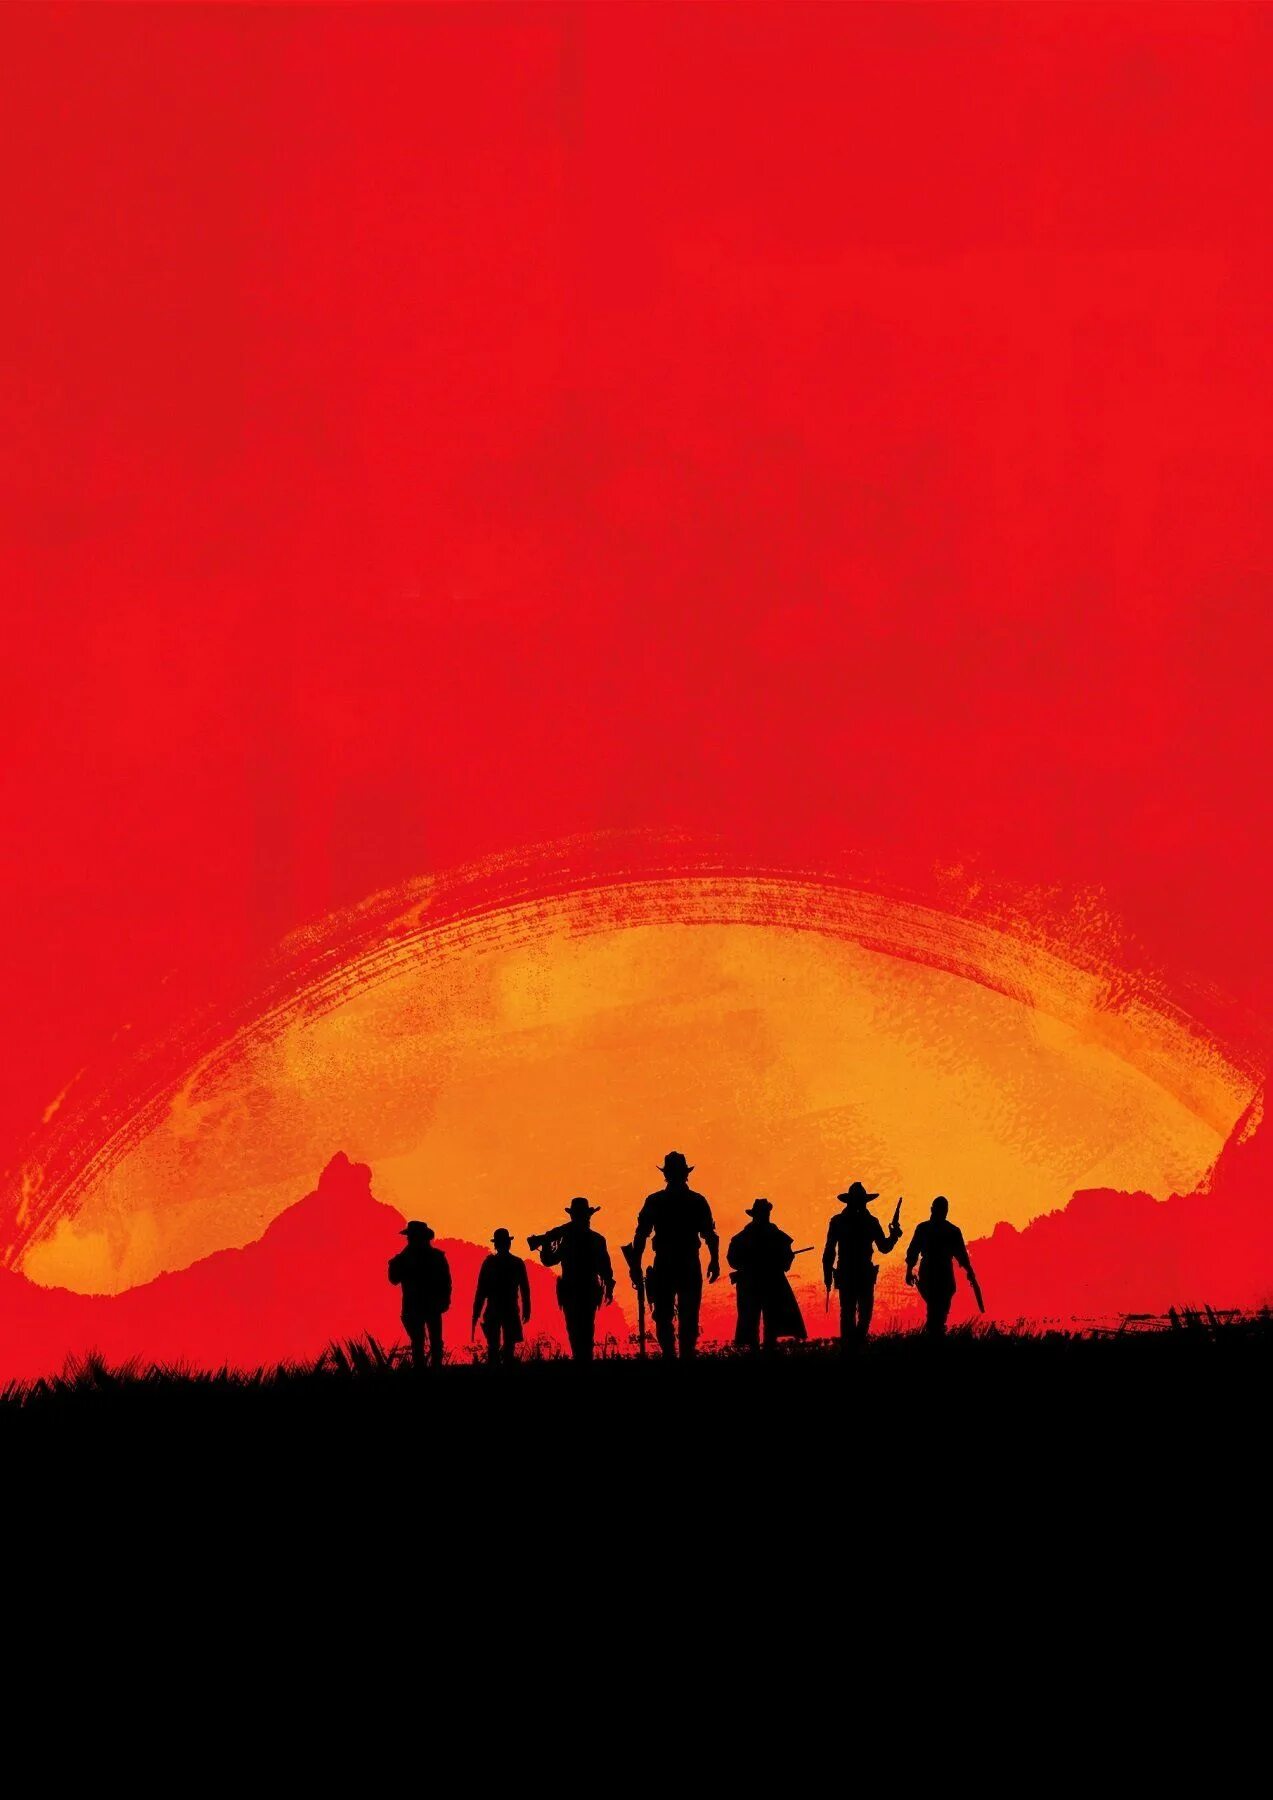 Рдр 2 плакат. Red Dead Redemption 2. Red Dead Redemption 2 poster. Red Dead Redemption 2 Постер. Red Dead Redemption 2 плакат.